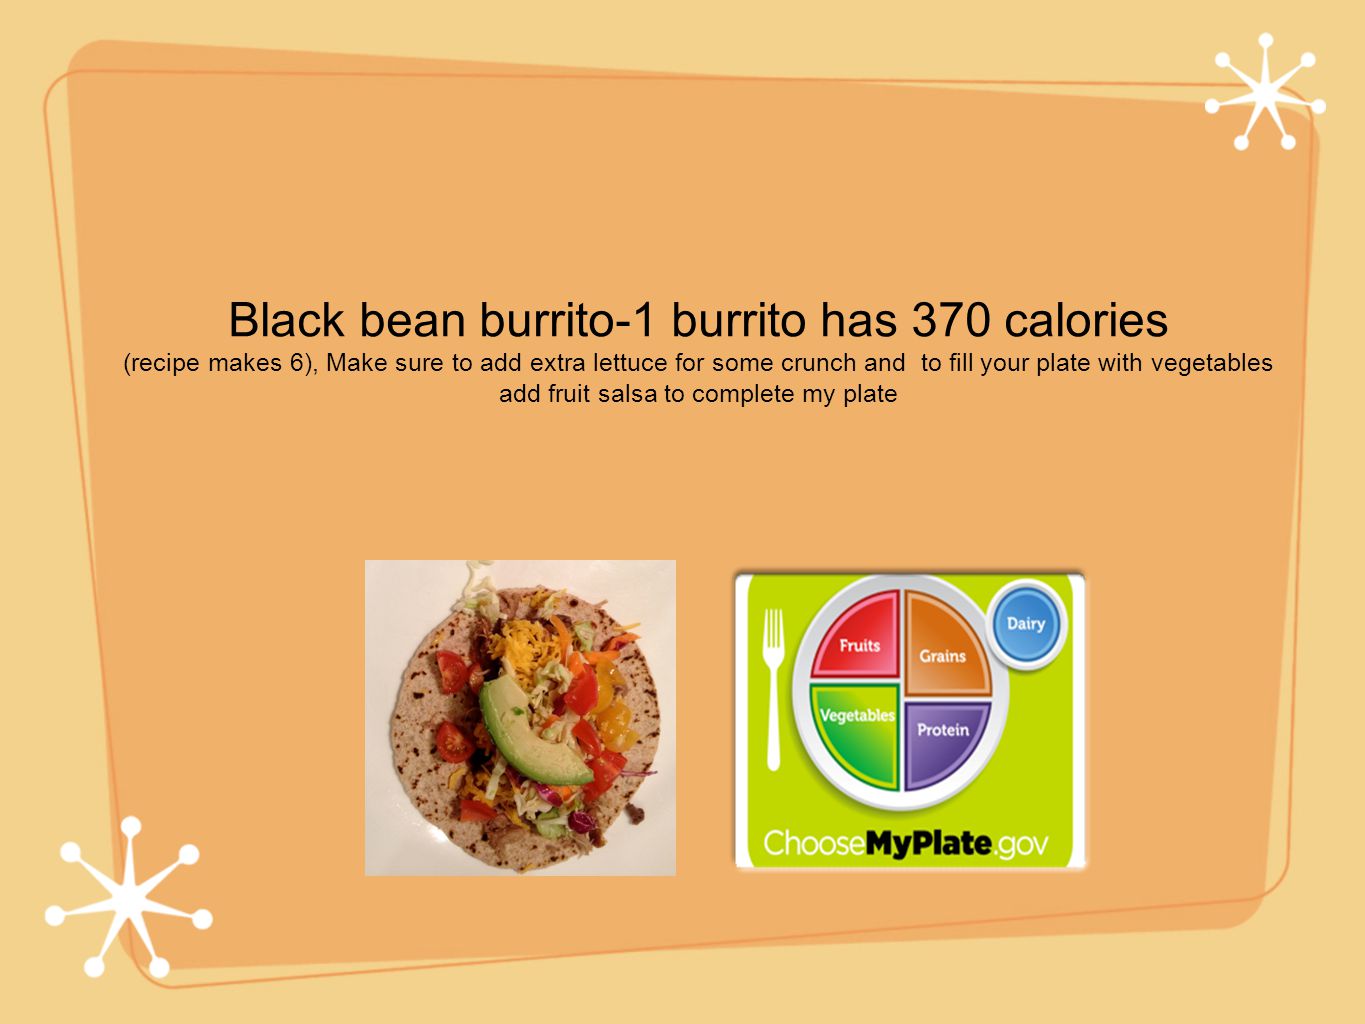 Black bean burrito-1 burrito has 370 calories (recipe makes 6), Make sure to add extra lettuce for some crunch and to fill your plate with vegetables add fruit salsa to complete my plate